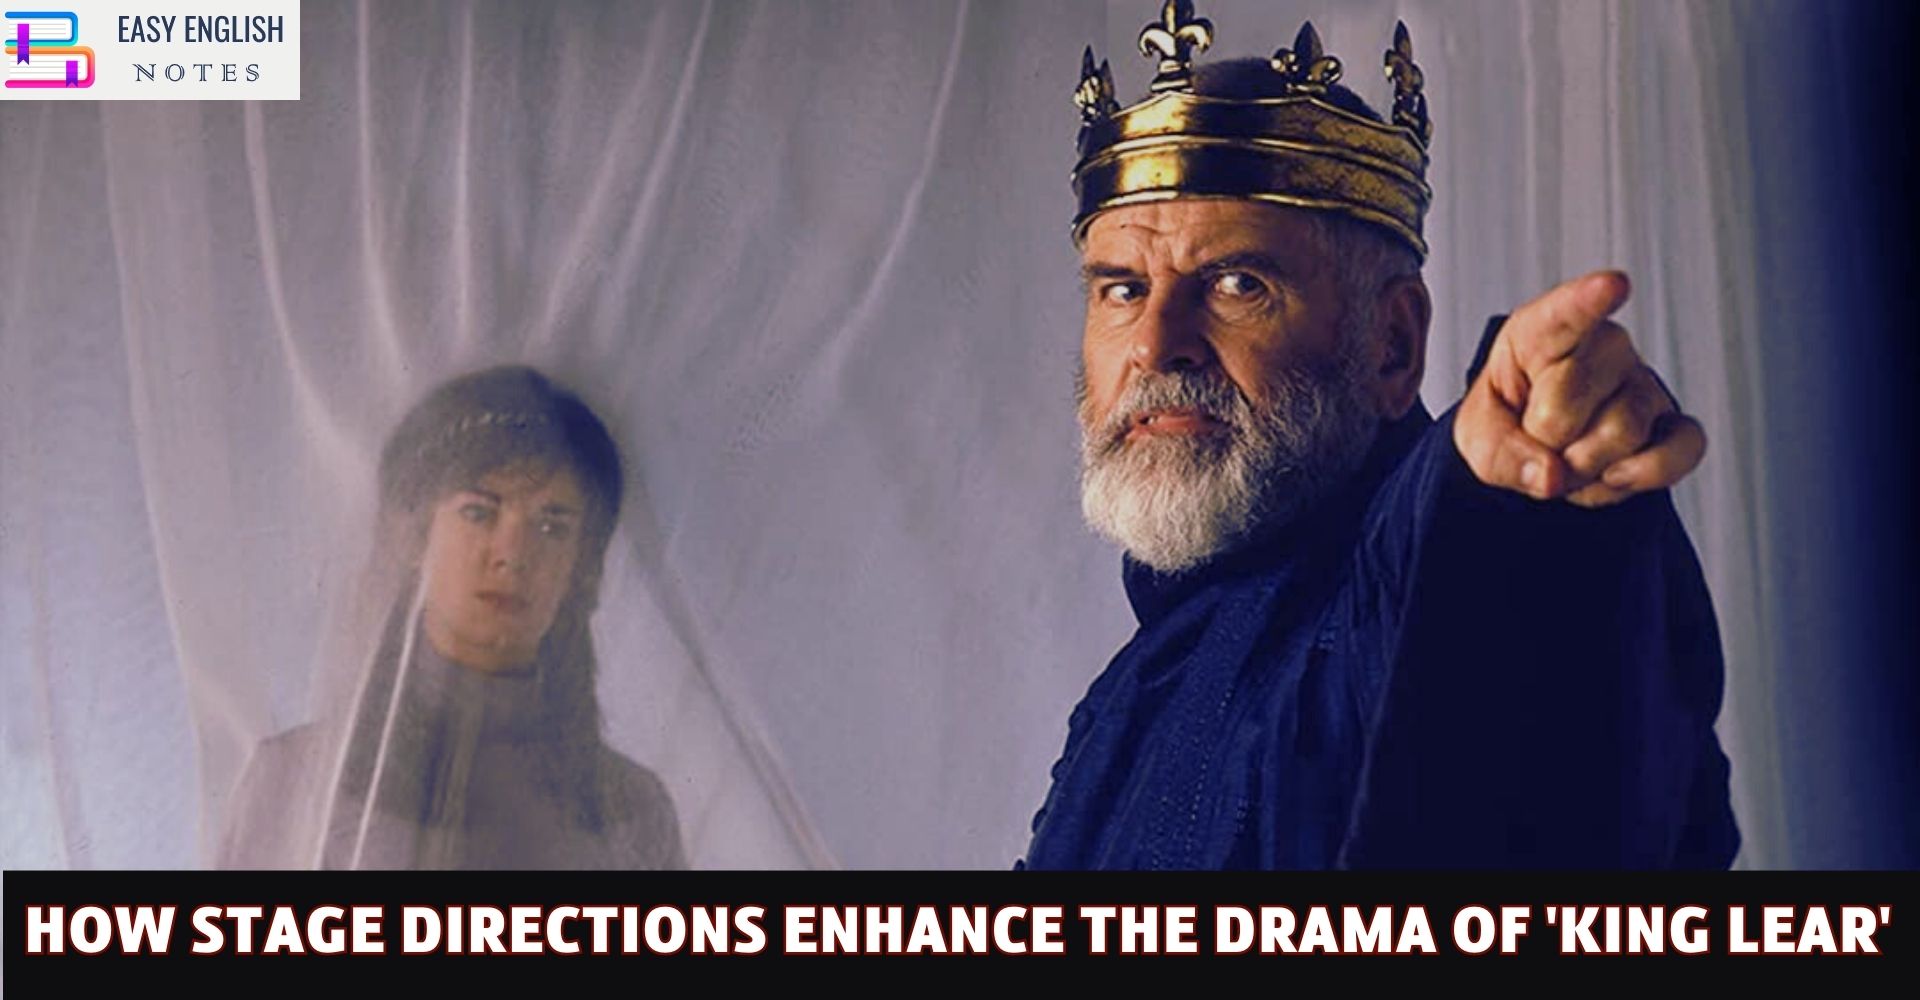 How Stage Directions Enhance the Drama of 'King Lear'